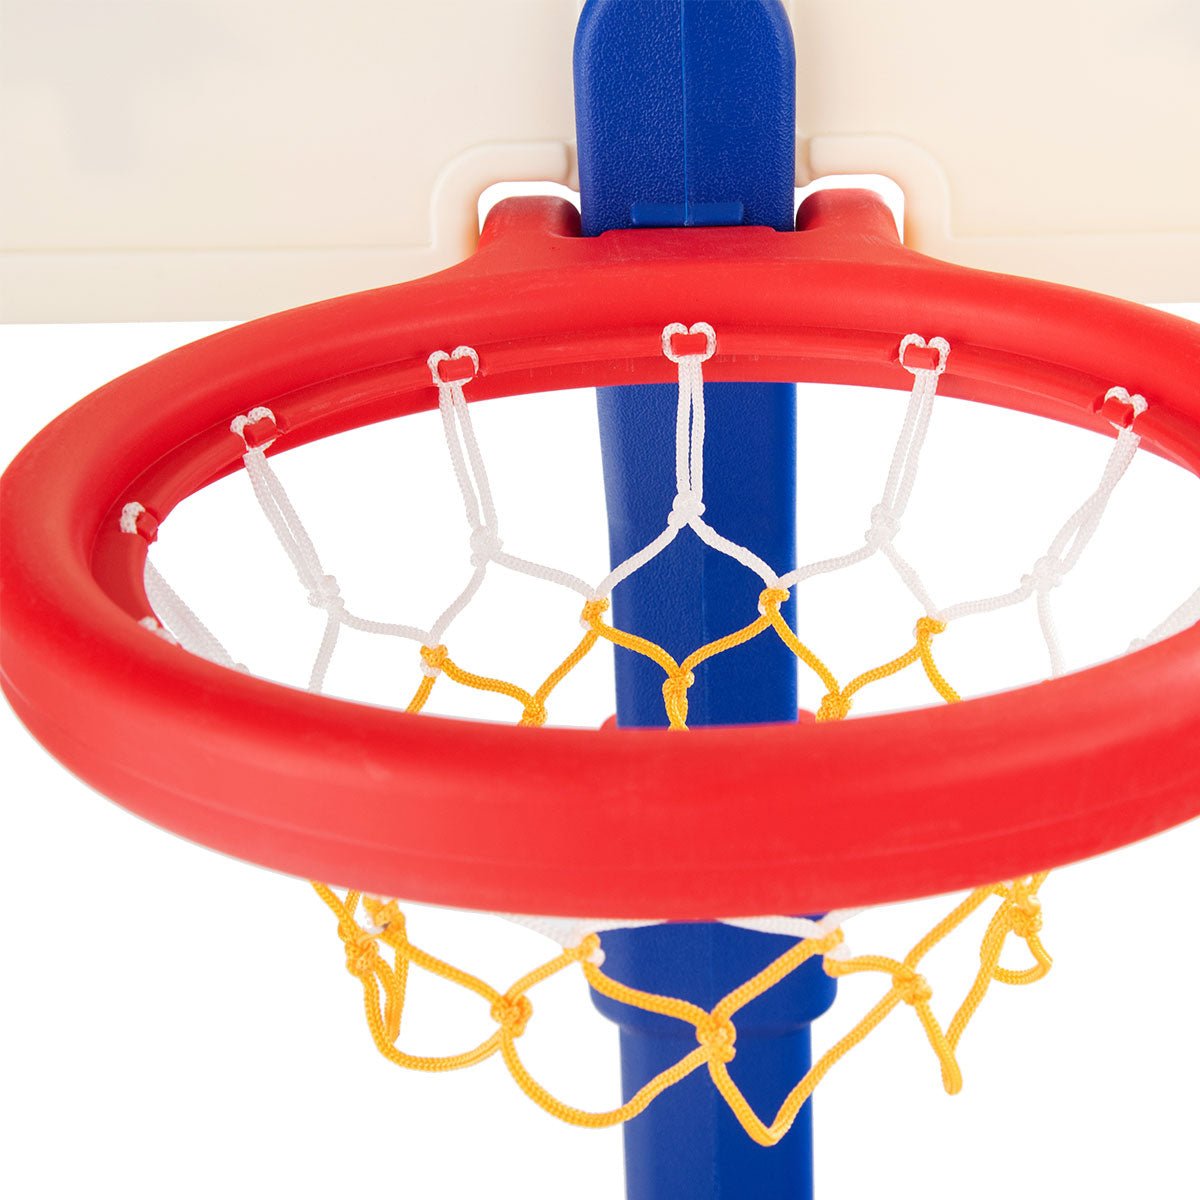 Play and Grow: Height Adjustable Toddler Basketball Hoop Stand for Kids